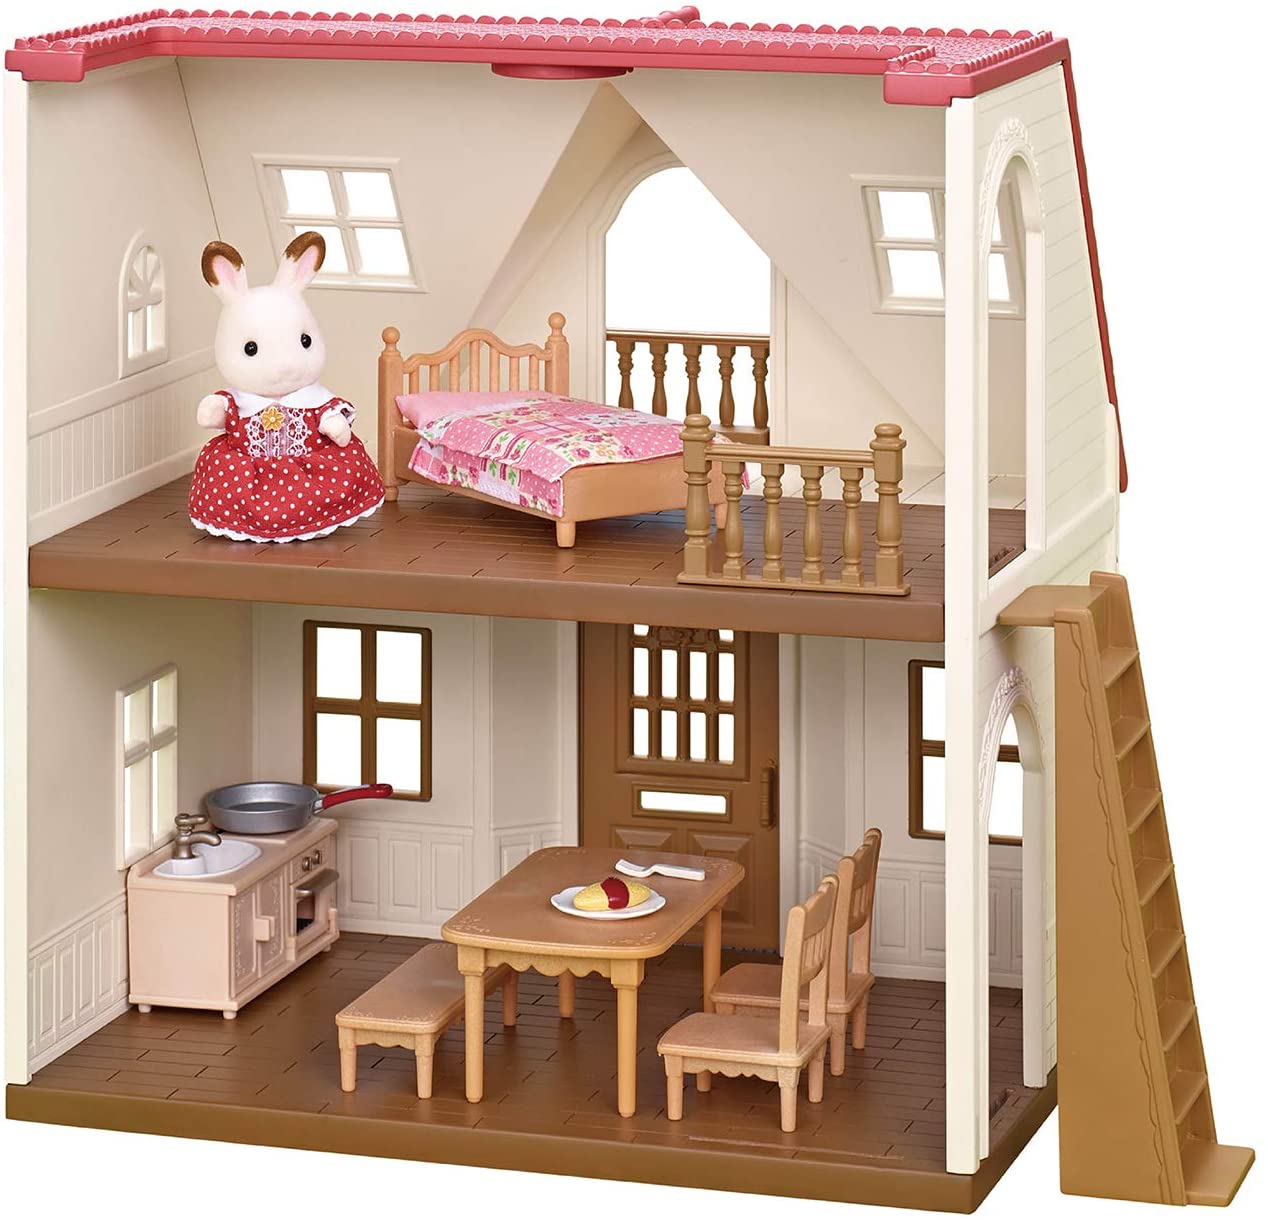 Calico Critters - Red Roof Cozy Cottage $23.19